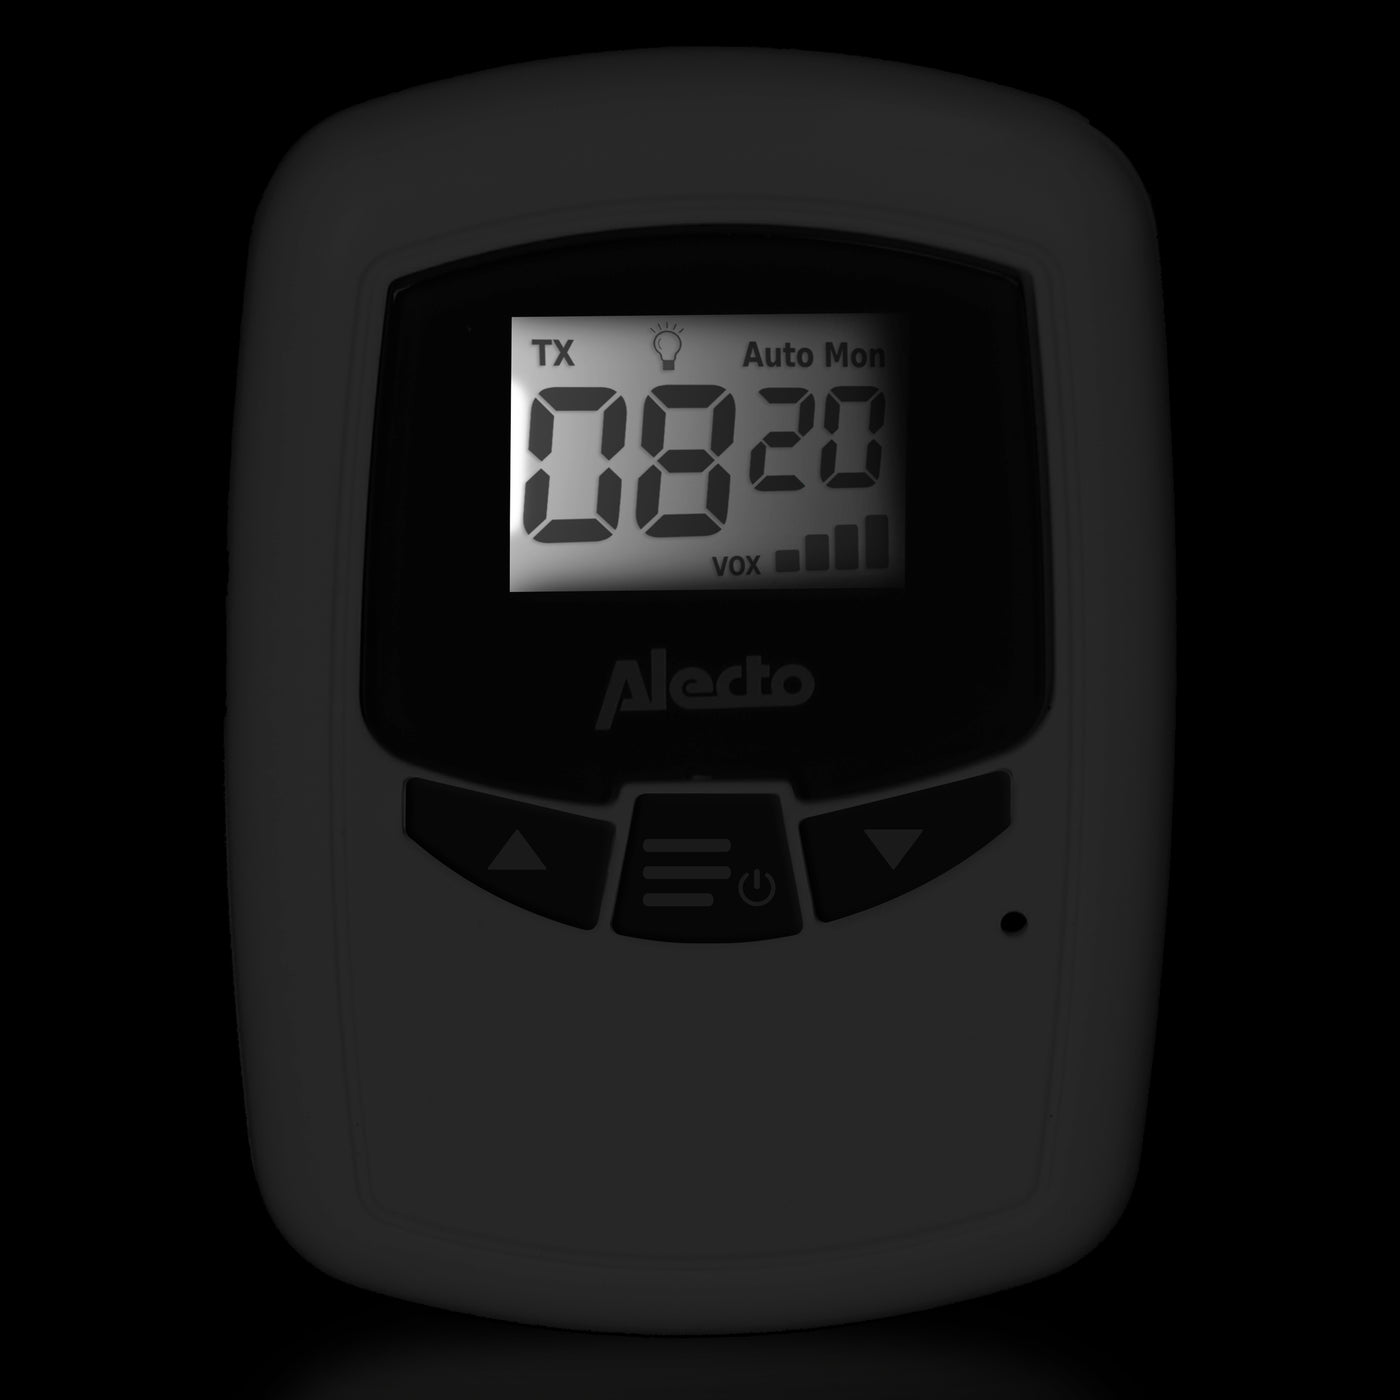 Alecto DBX80BK - Baby monitor with range up to 3000 meter, black